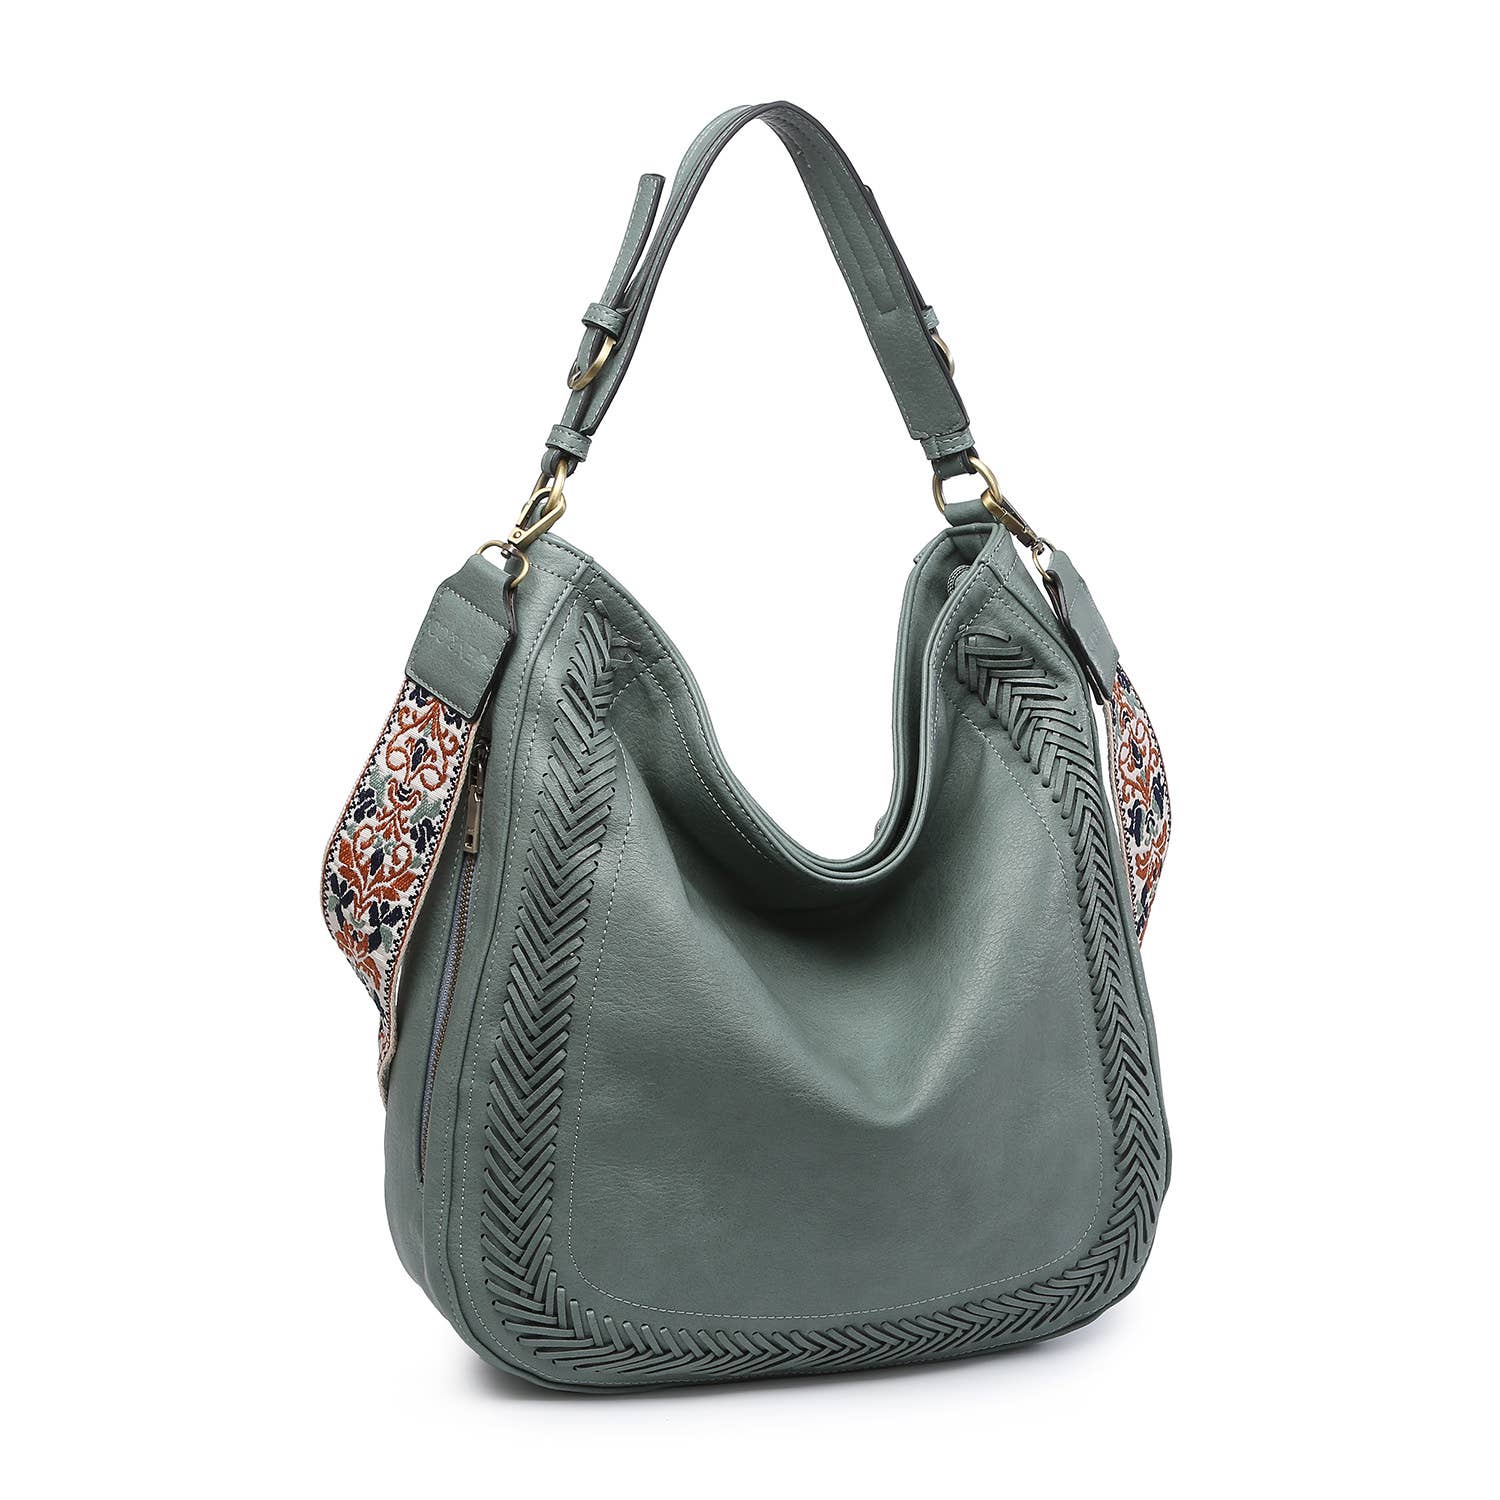 Aris Teal Whipstitch Hobo/Crossbody w/ Guitar Strap - Coco and lulu boutique 